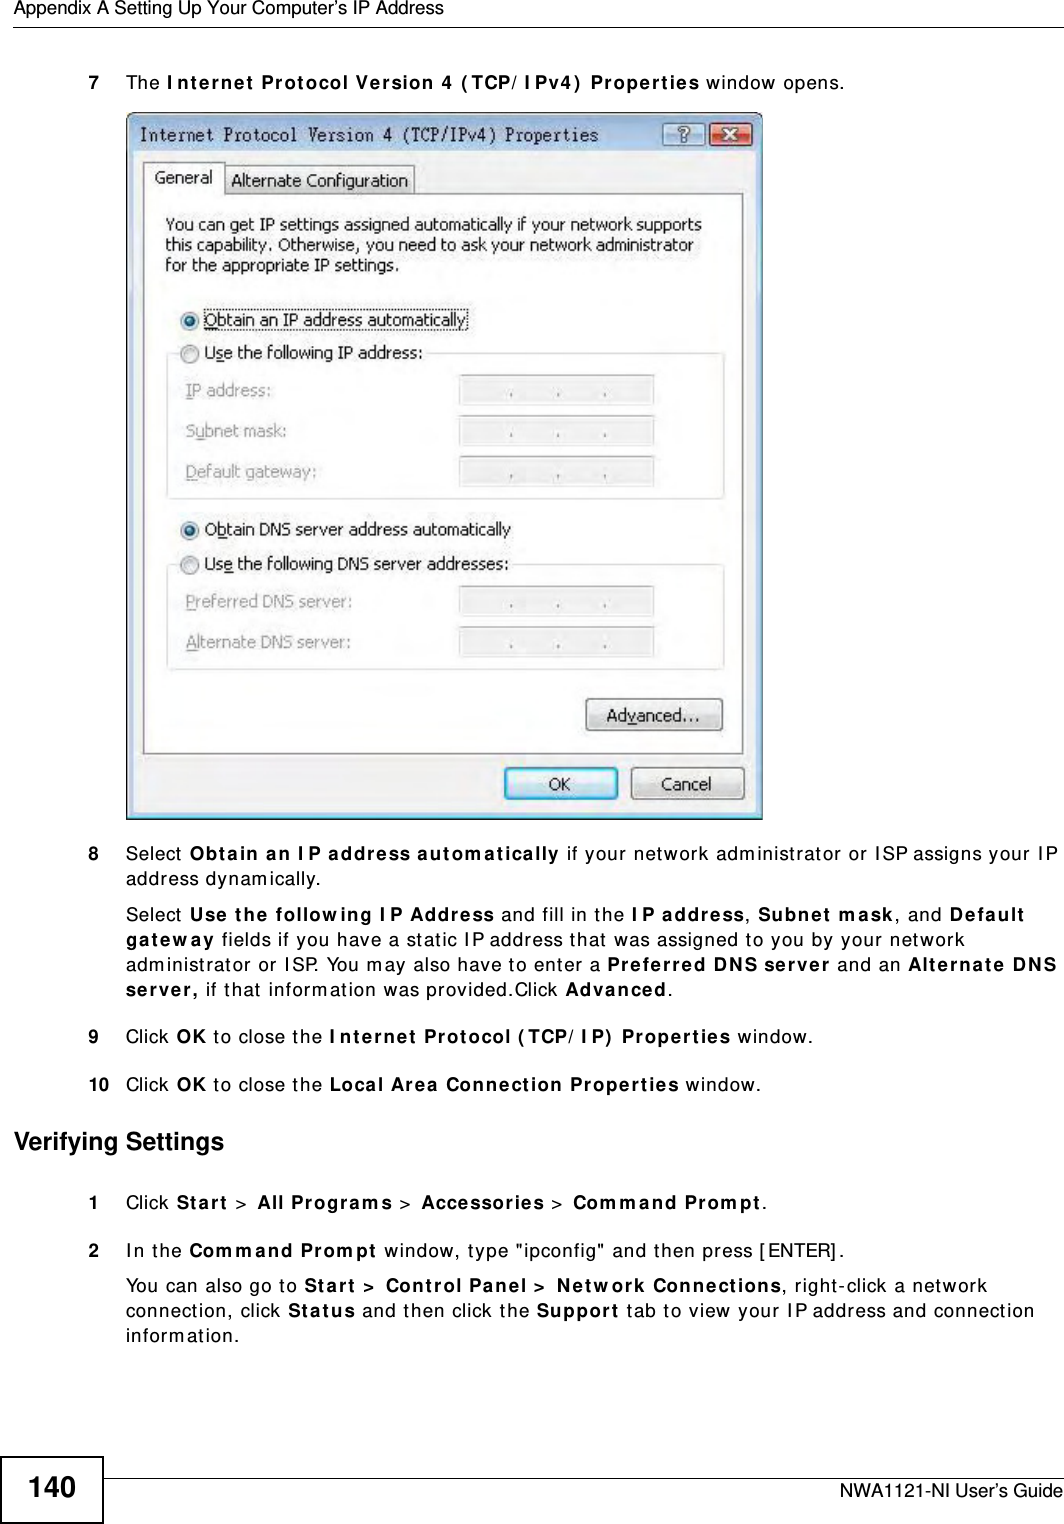 Appendix A Setting Up Your Computer’s IP AddressNWA1121-NI User’s Guide1407The Internet Protocol Version 4 (TCP/IPv4) Properties window opens.8Select Obtain an IP address automatically if your network administrator or ISP assigns your IP address dynamically.Select Use the following IP Address and fill in the IP address, Subnet mask, and Default gateway fields if you have a static IP address that was assigned to you by your network administrator or ISP. You may also have to enter a Preferred DNS server and an Alternate DNS server, if that information was provided.Click Advanced.9Click OK to close the Internet Protocol (TCP/IP) Properties window.10 Click OK to close the Local Area Connection Properties window.Verifying Settings1Click Start &gt; All Programs &gt; Accessories &gt; Command Prompt.2In the Command Prompt window, type &quot;ipconfig&quot; and then press [ENTER]. You can also go to Start &gt; Control Panel &gt; Network Connections, right-click a network connection, click Status and then click the Support tab to view your IP address and connection information.